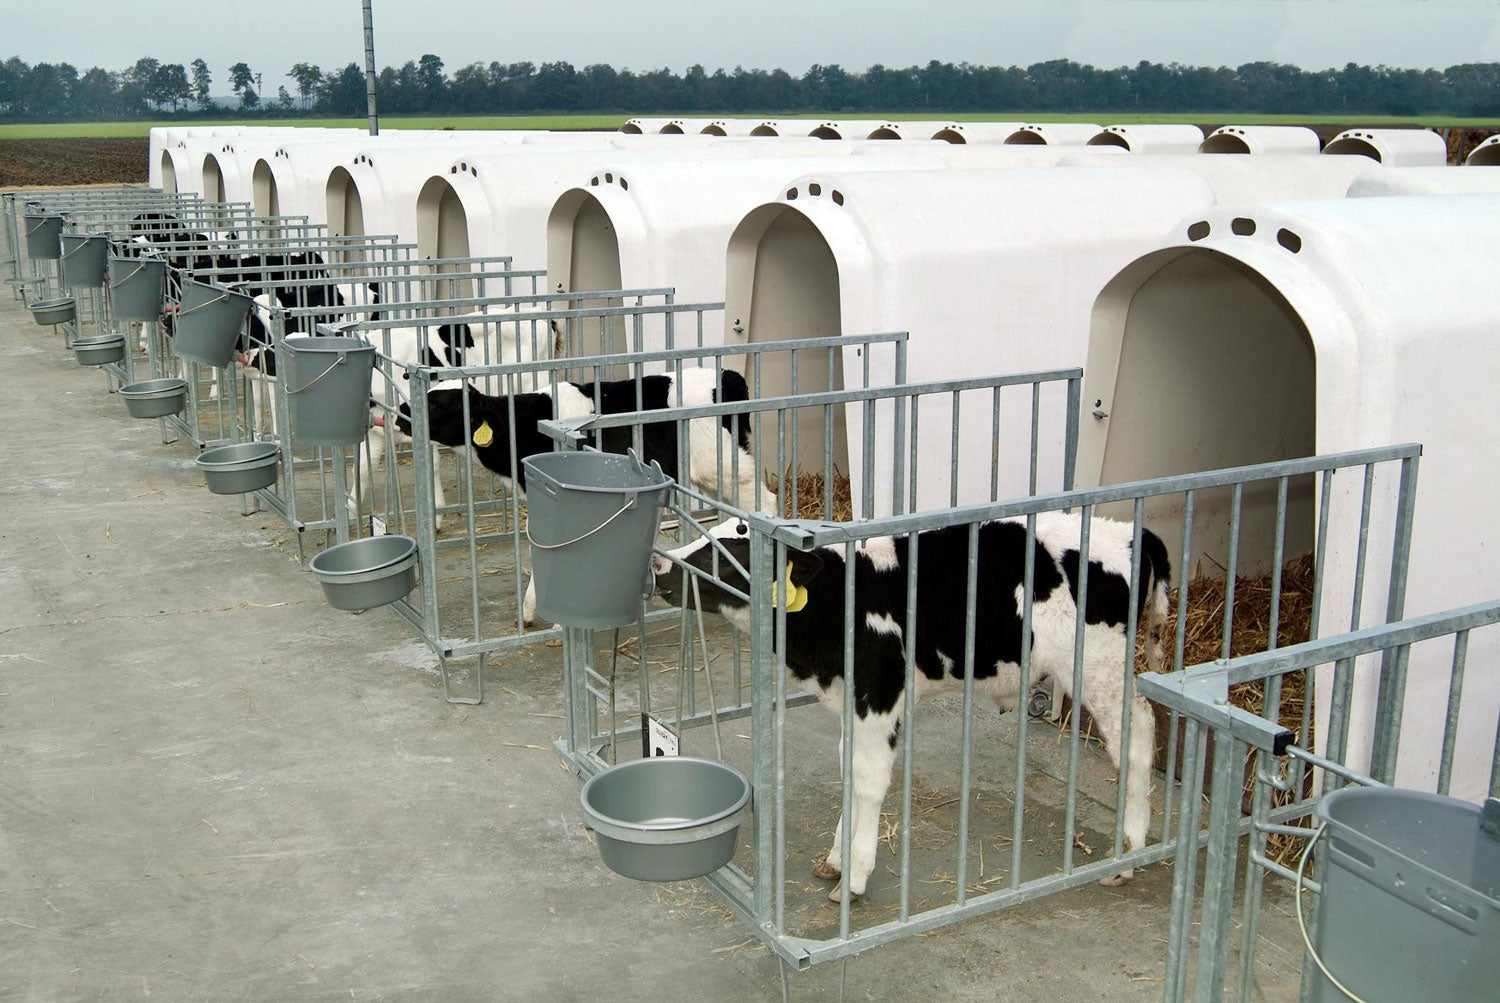 Gallery image of CalfOTel calf hutches; this is an Individual hutches, though there is a group of them